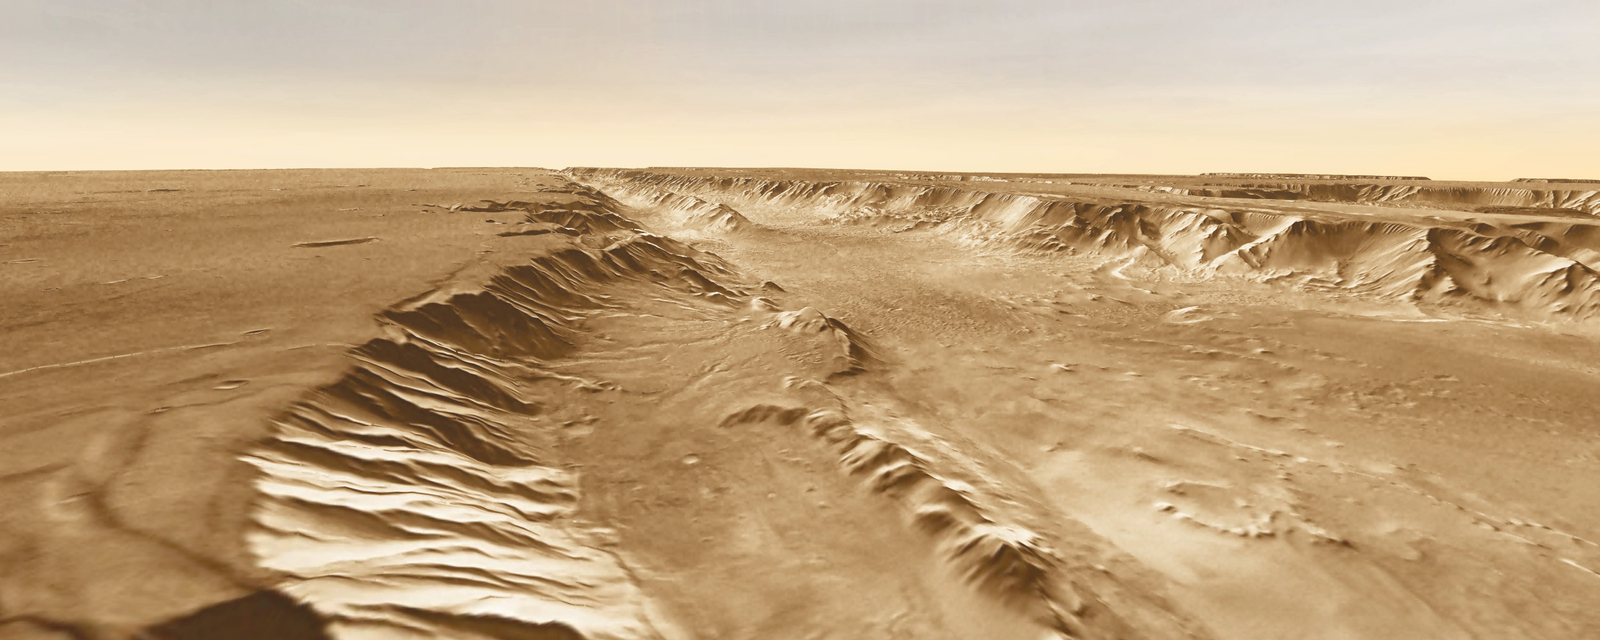 A small basin (center foreground) lies below the southern rim of Melas Chasma, part of Valles Marineris.